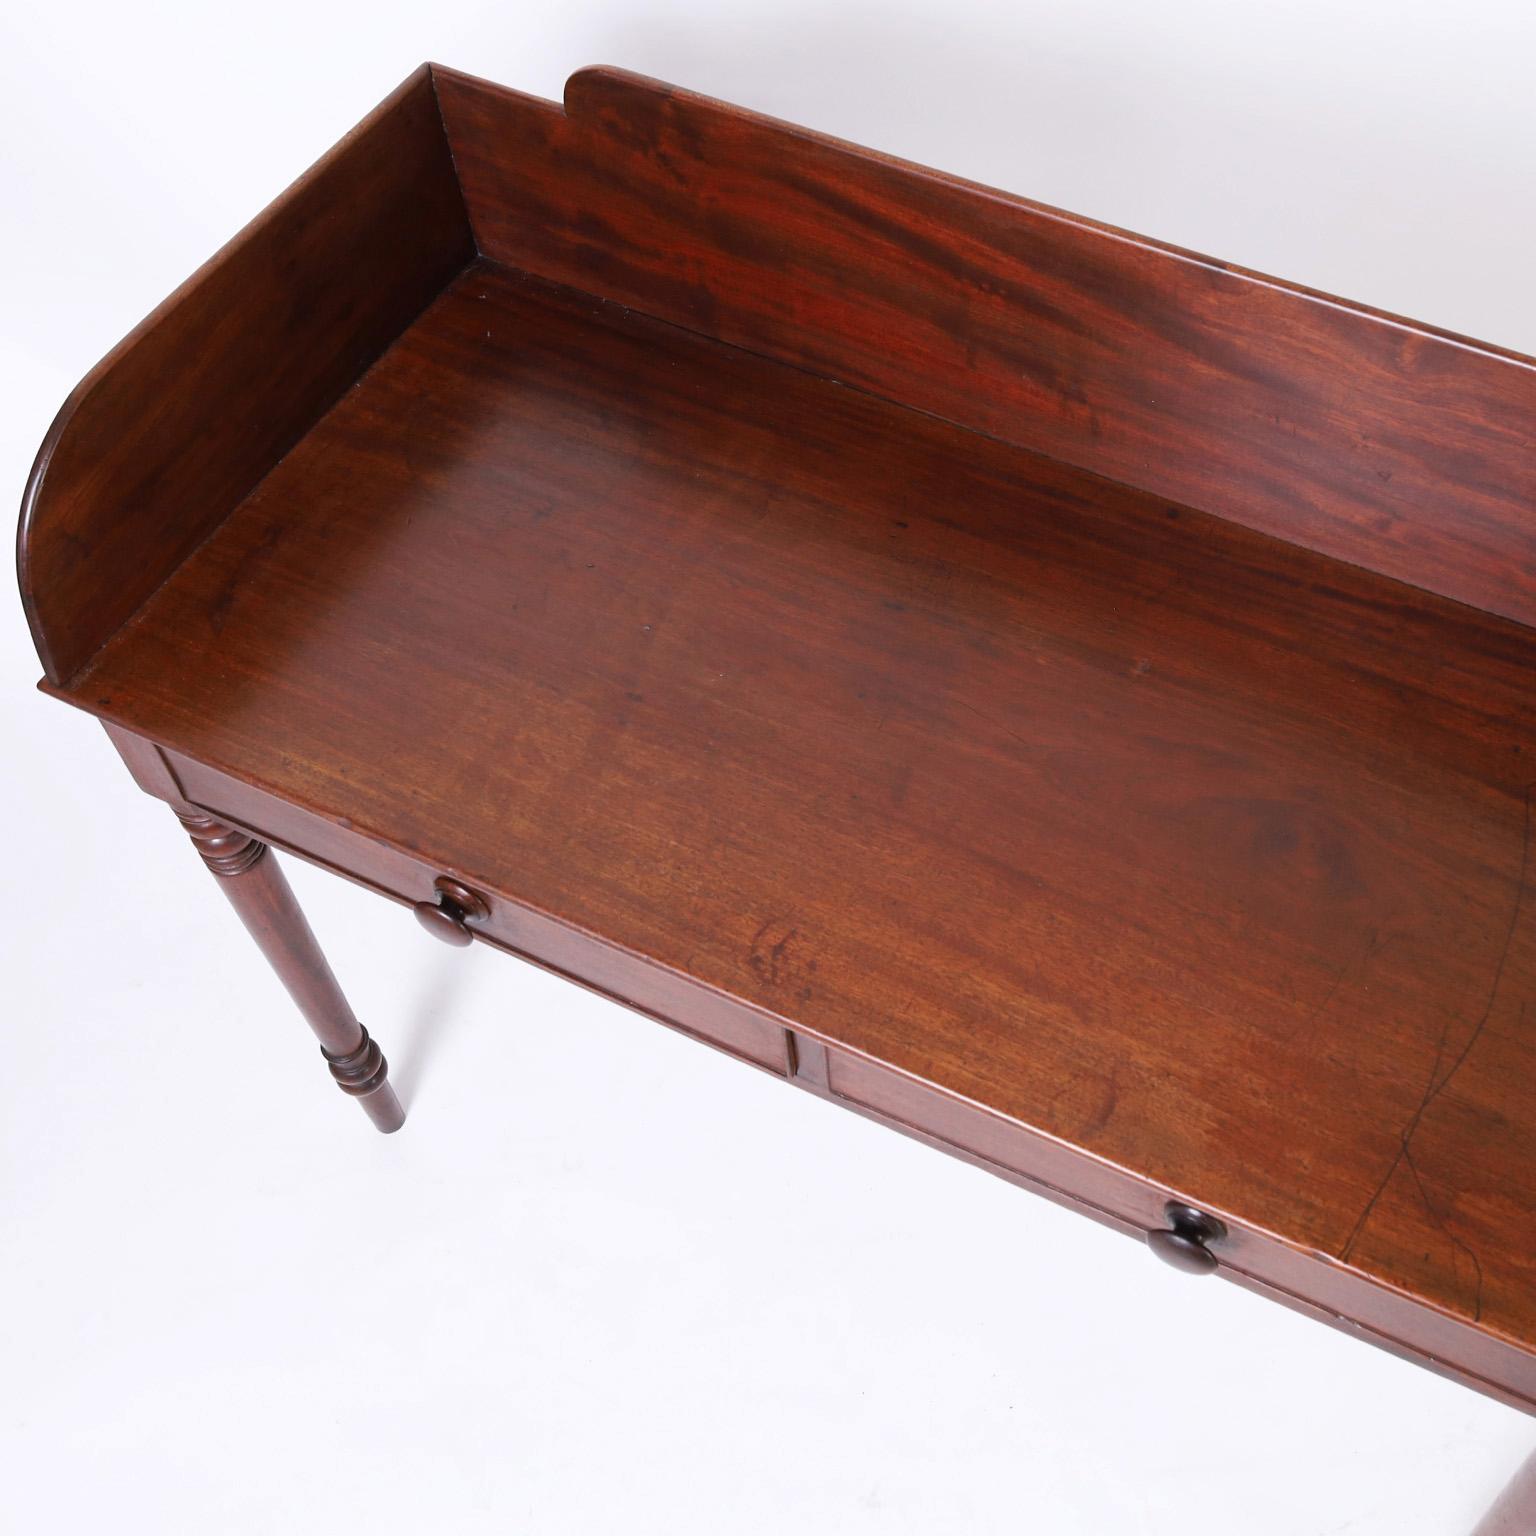 Hand-Crafted British Colonial Sheraton Server For Sale